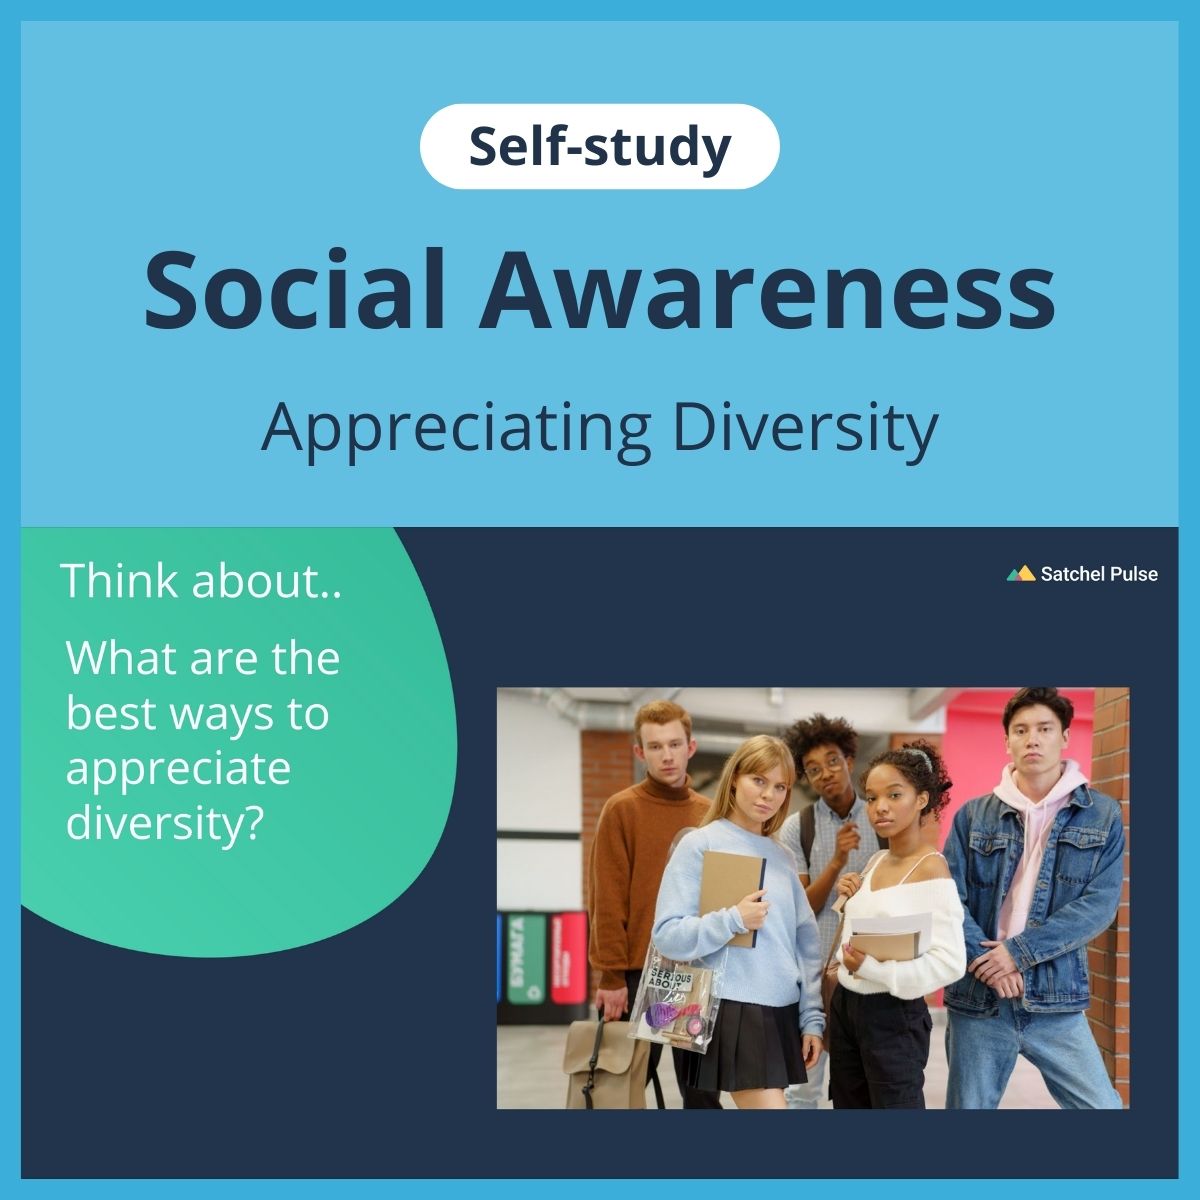 SEL self-study focusing on Appreciating Diversity to use in your classroom as one of your SEL activities for Social Awareness